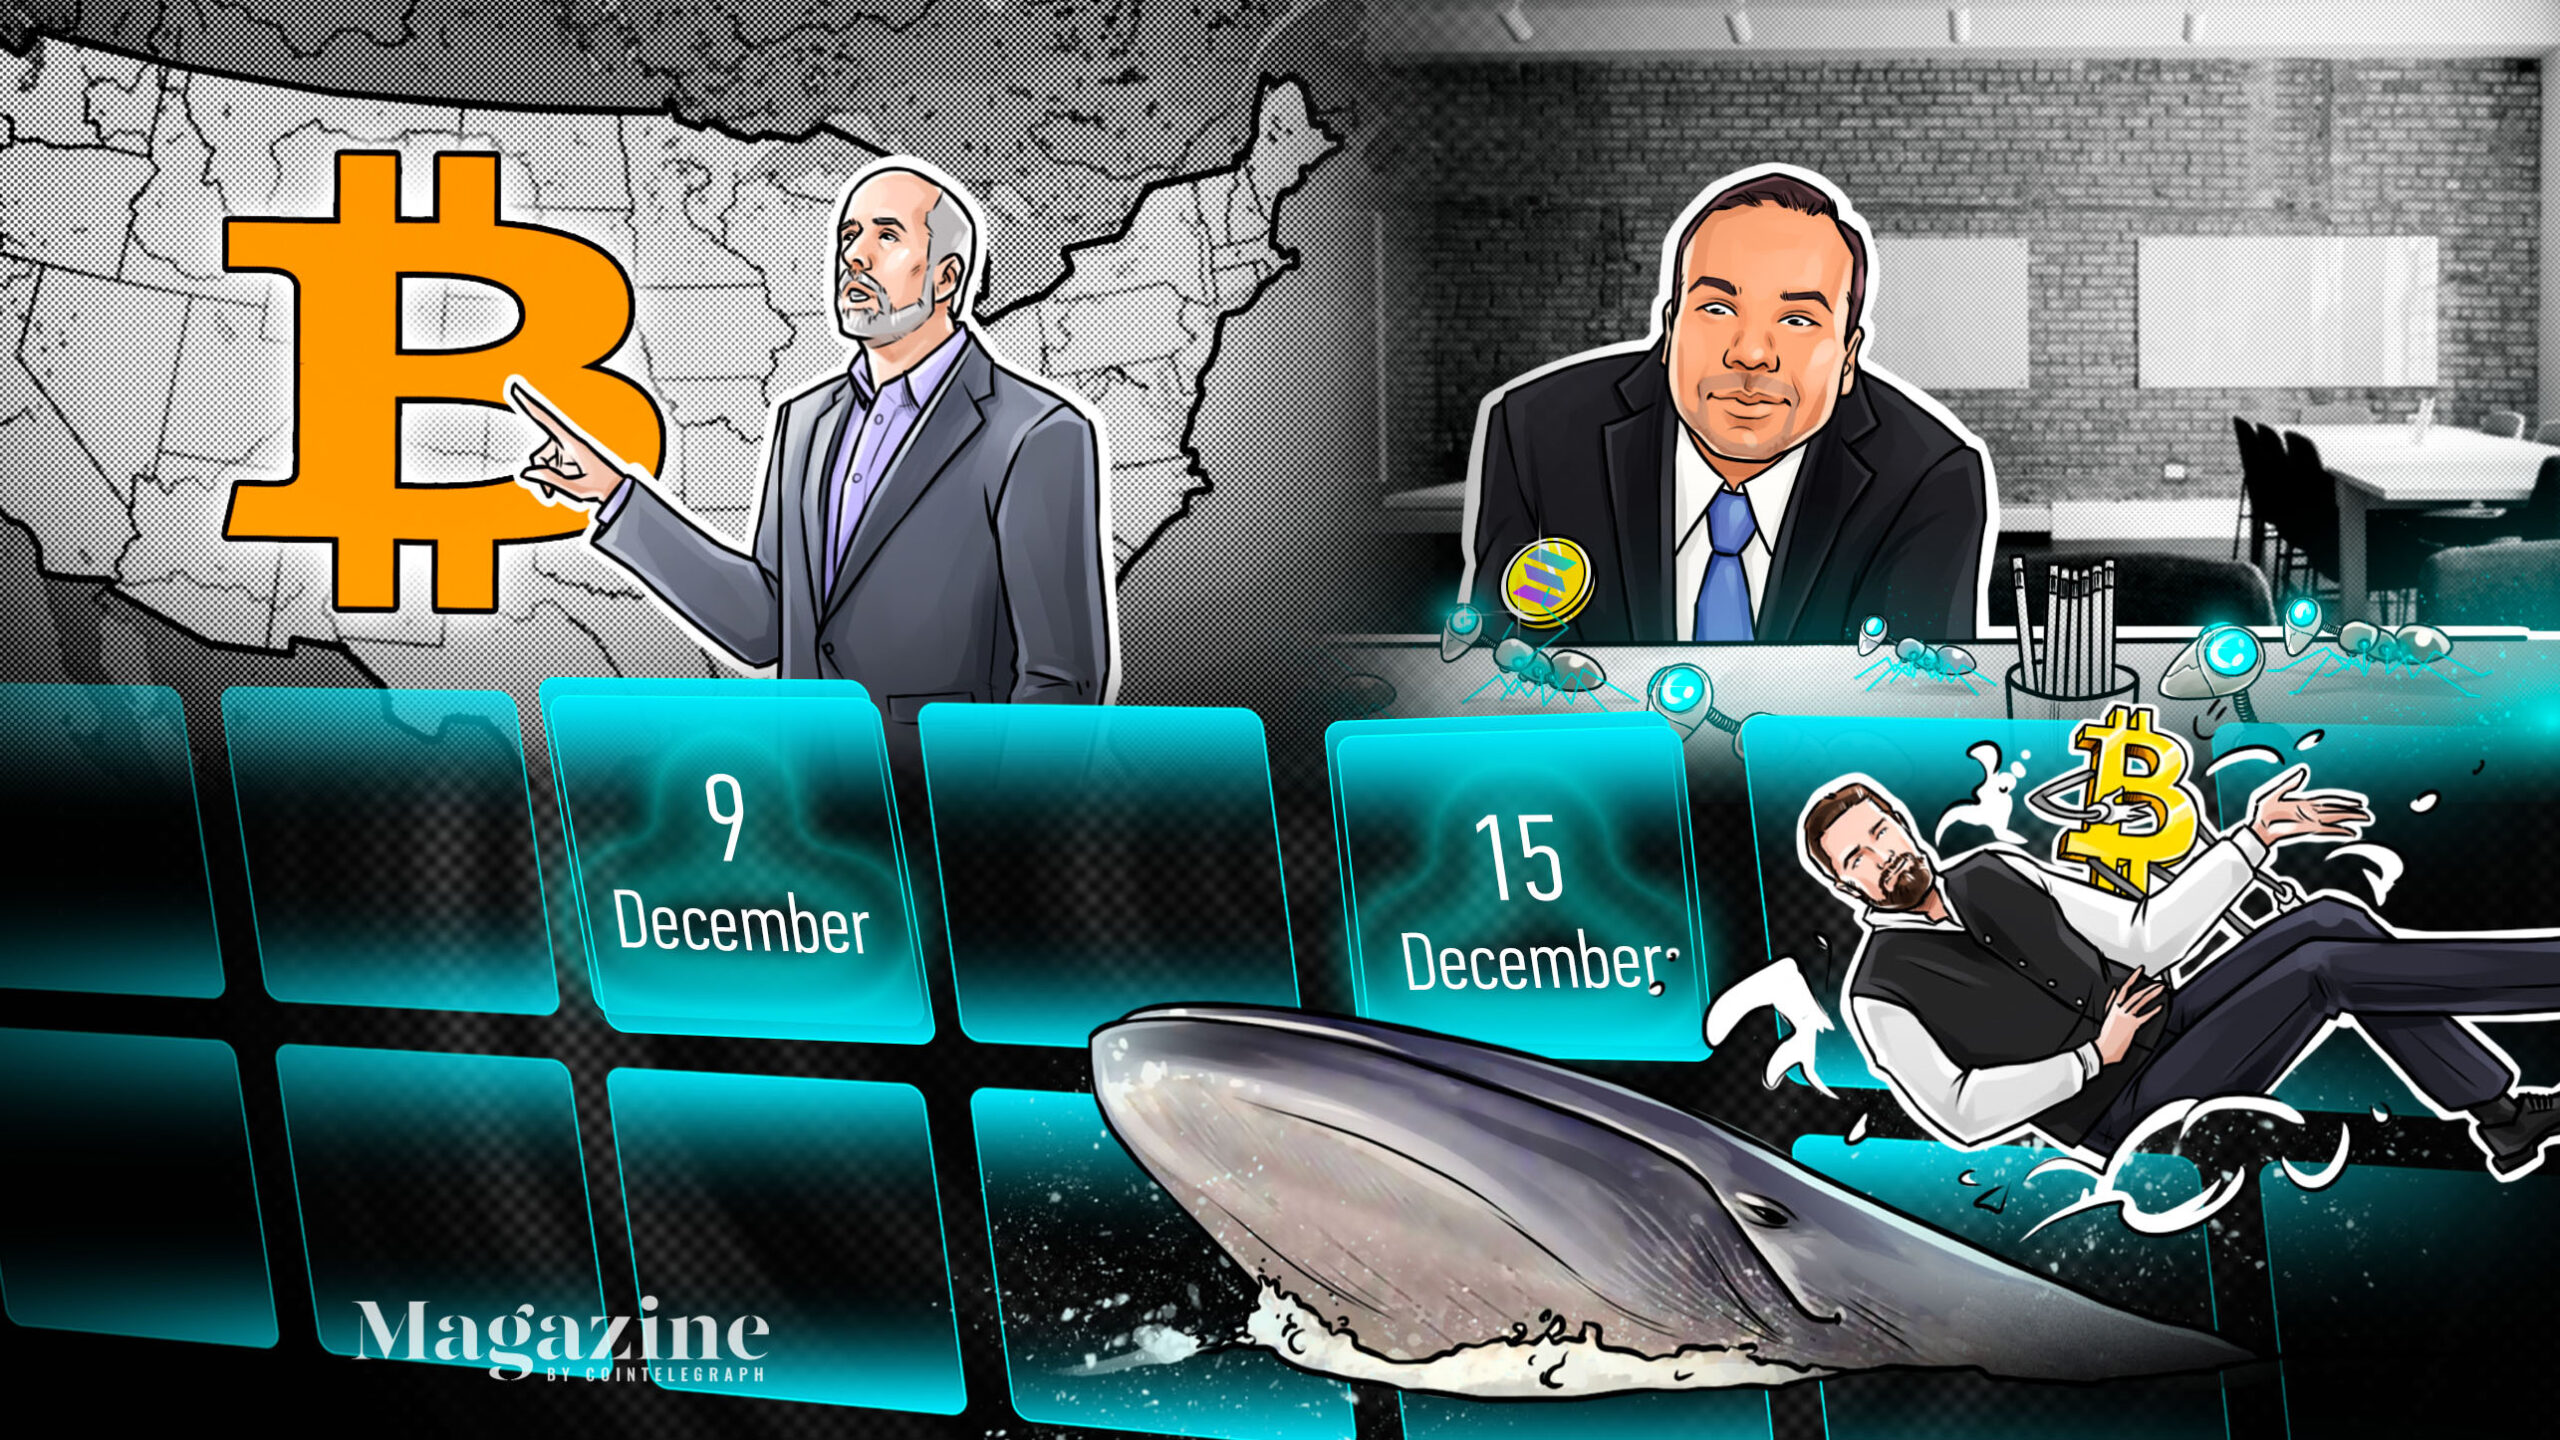 Binance CEO’s net worth hits $96B, Jack Dorsey launches BTC defense fund, Bill Miller apes into Bitcoin: Hodler’s Digest, Jan 9-15